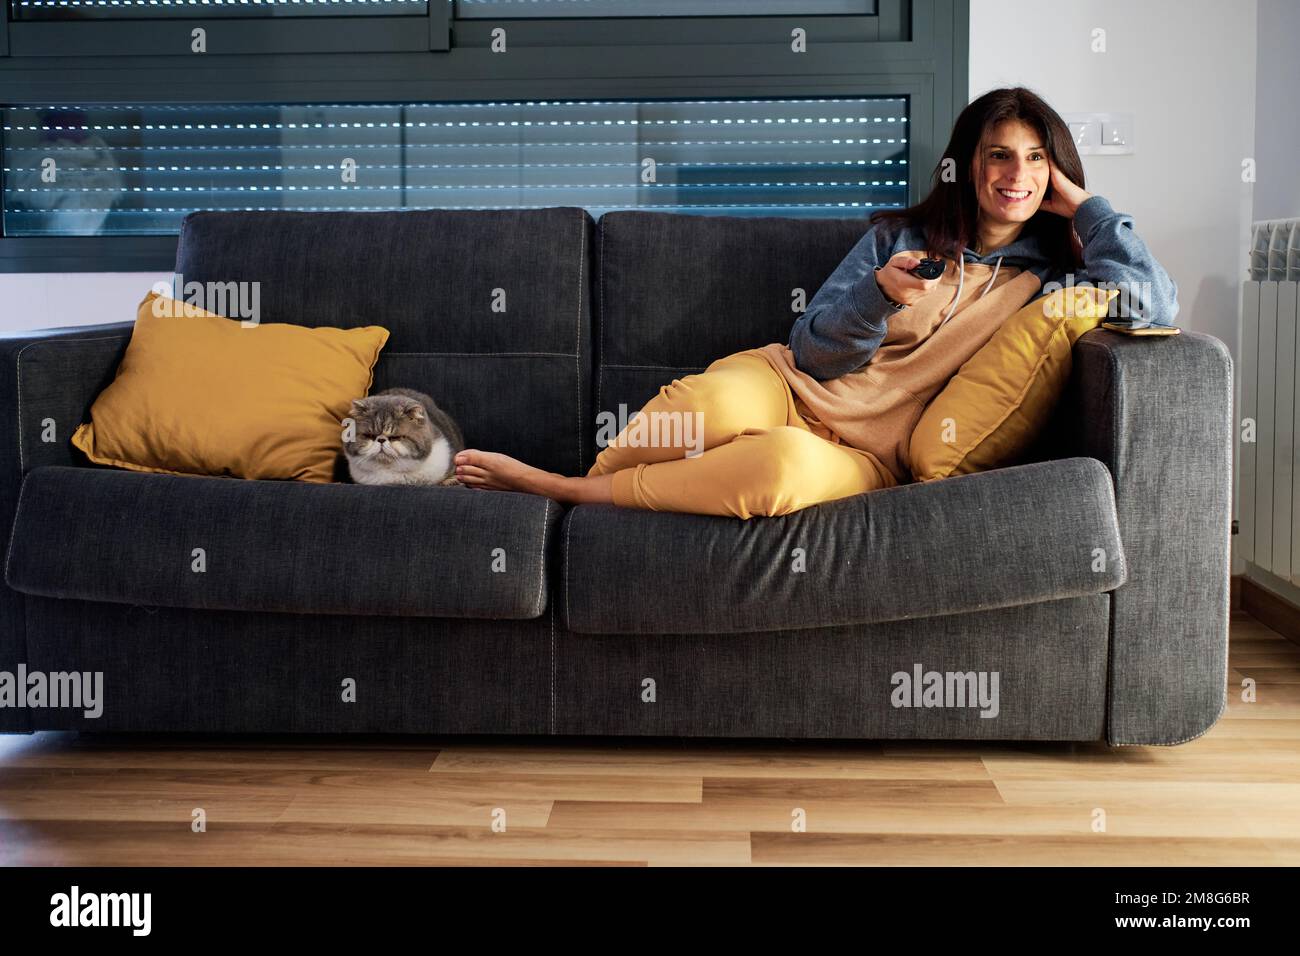 Relaxed woman smiling while watching the tv with her cat on the sofa. Stock Photo